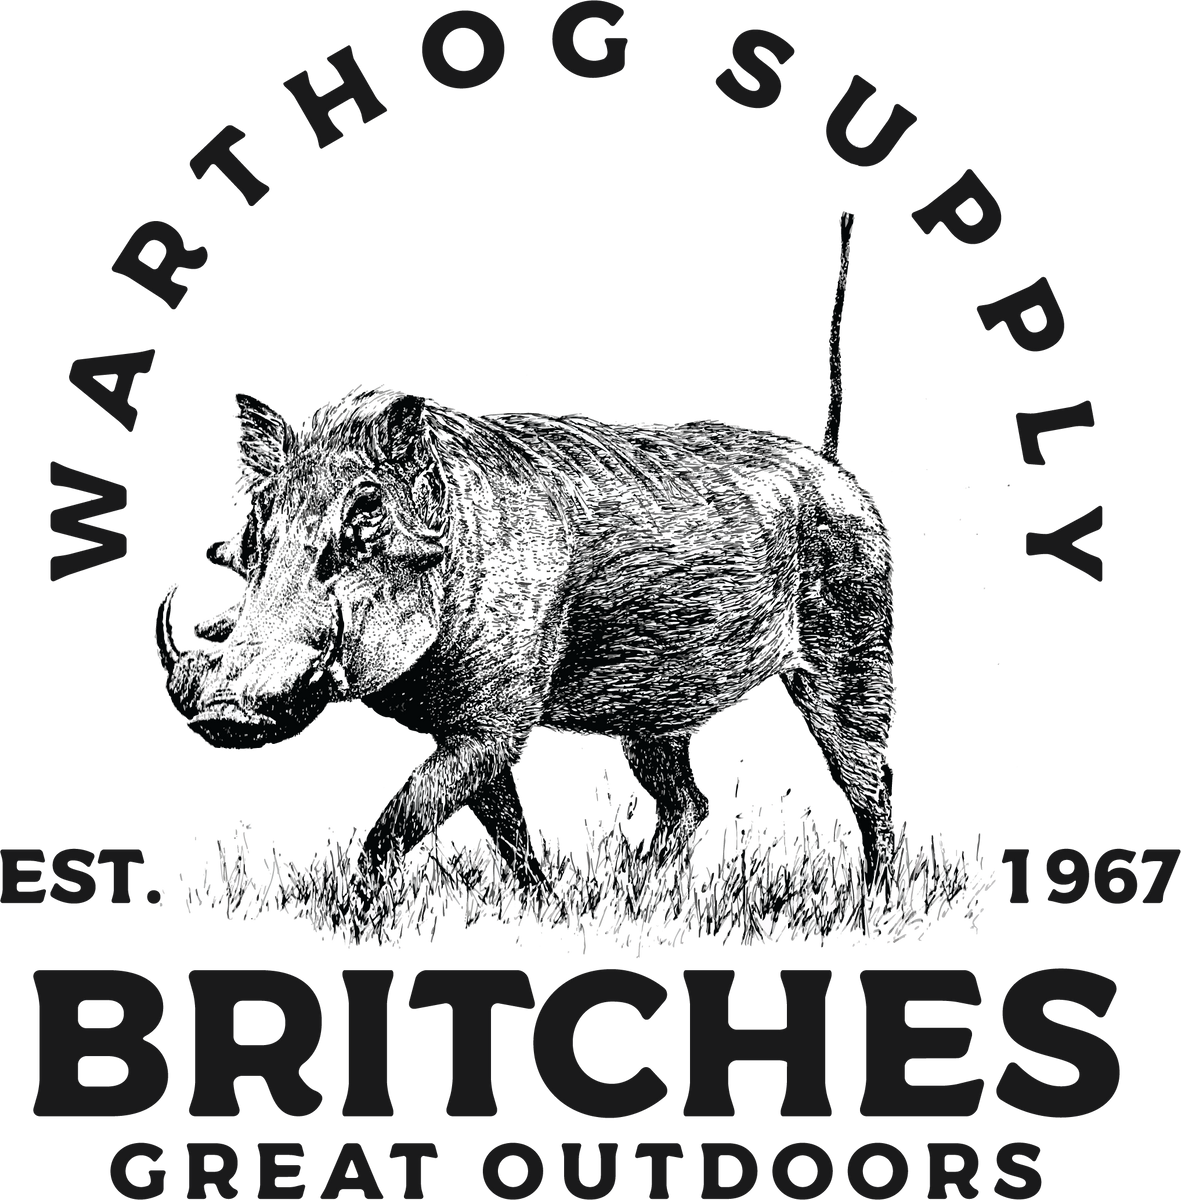 Britches Great Outdoors | Warthog